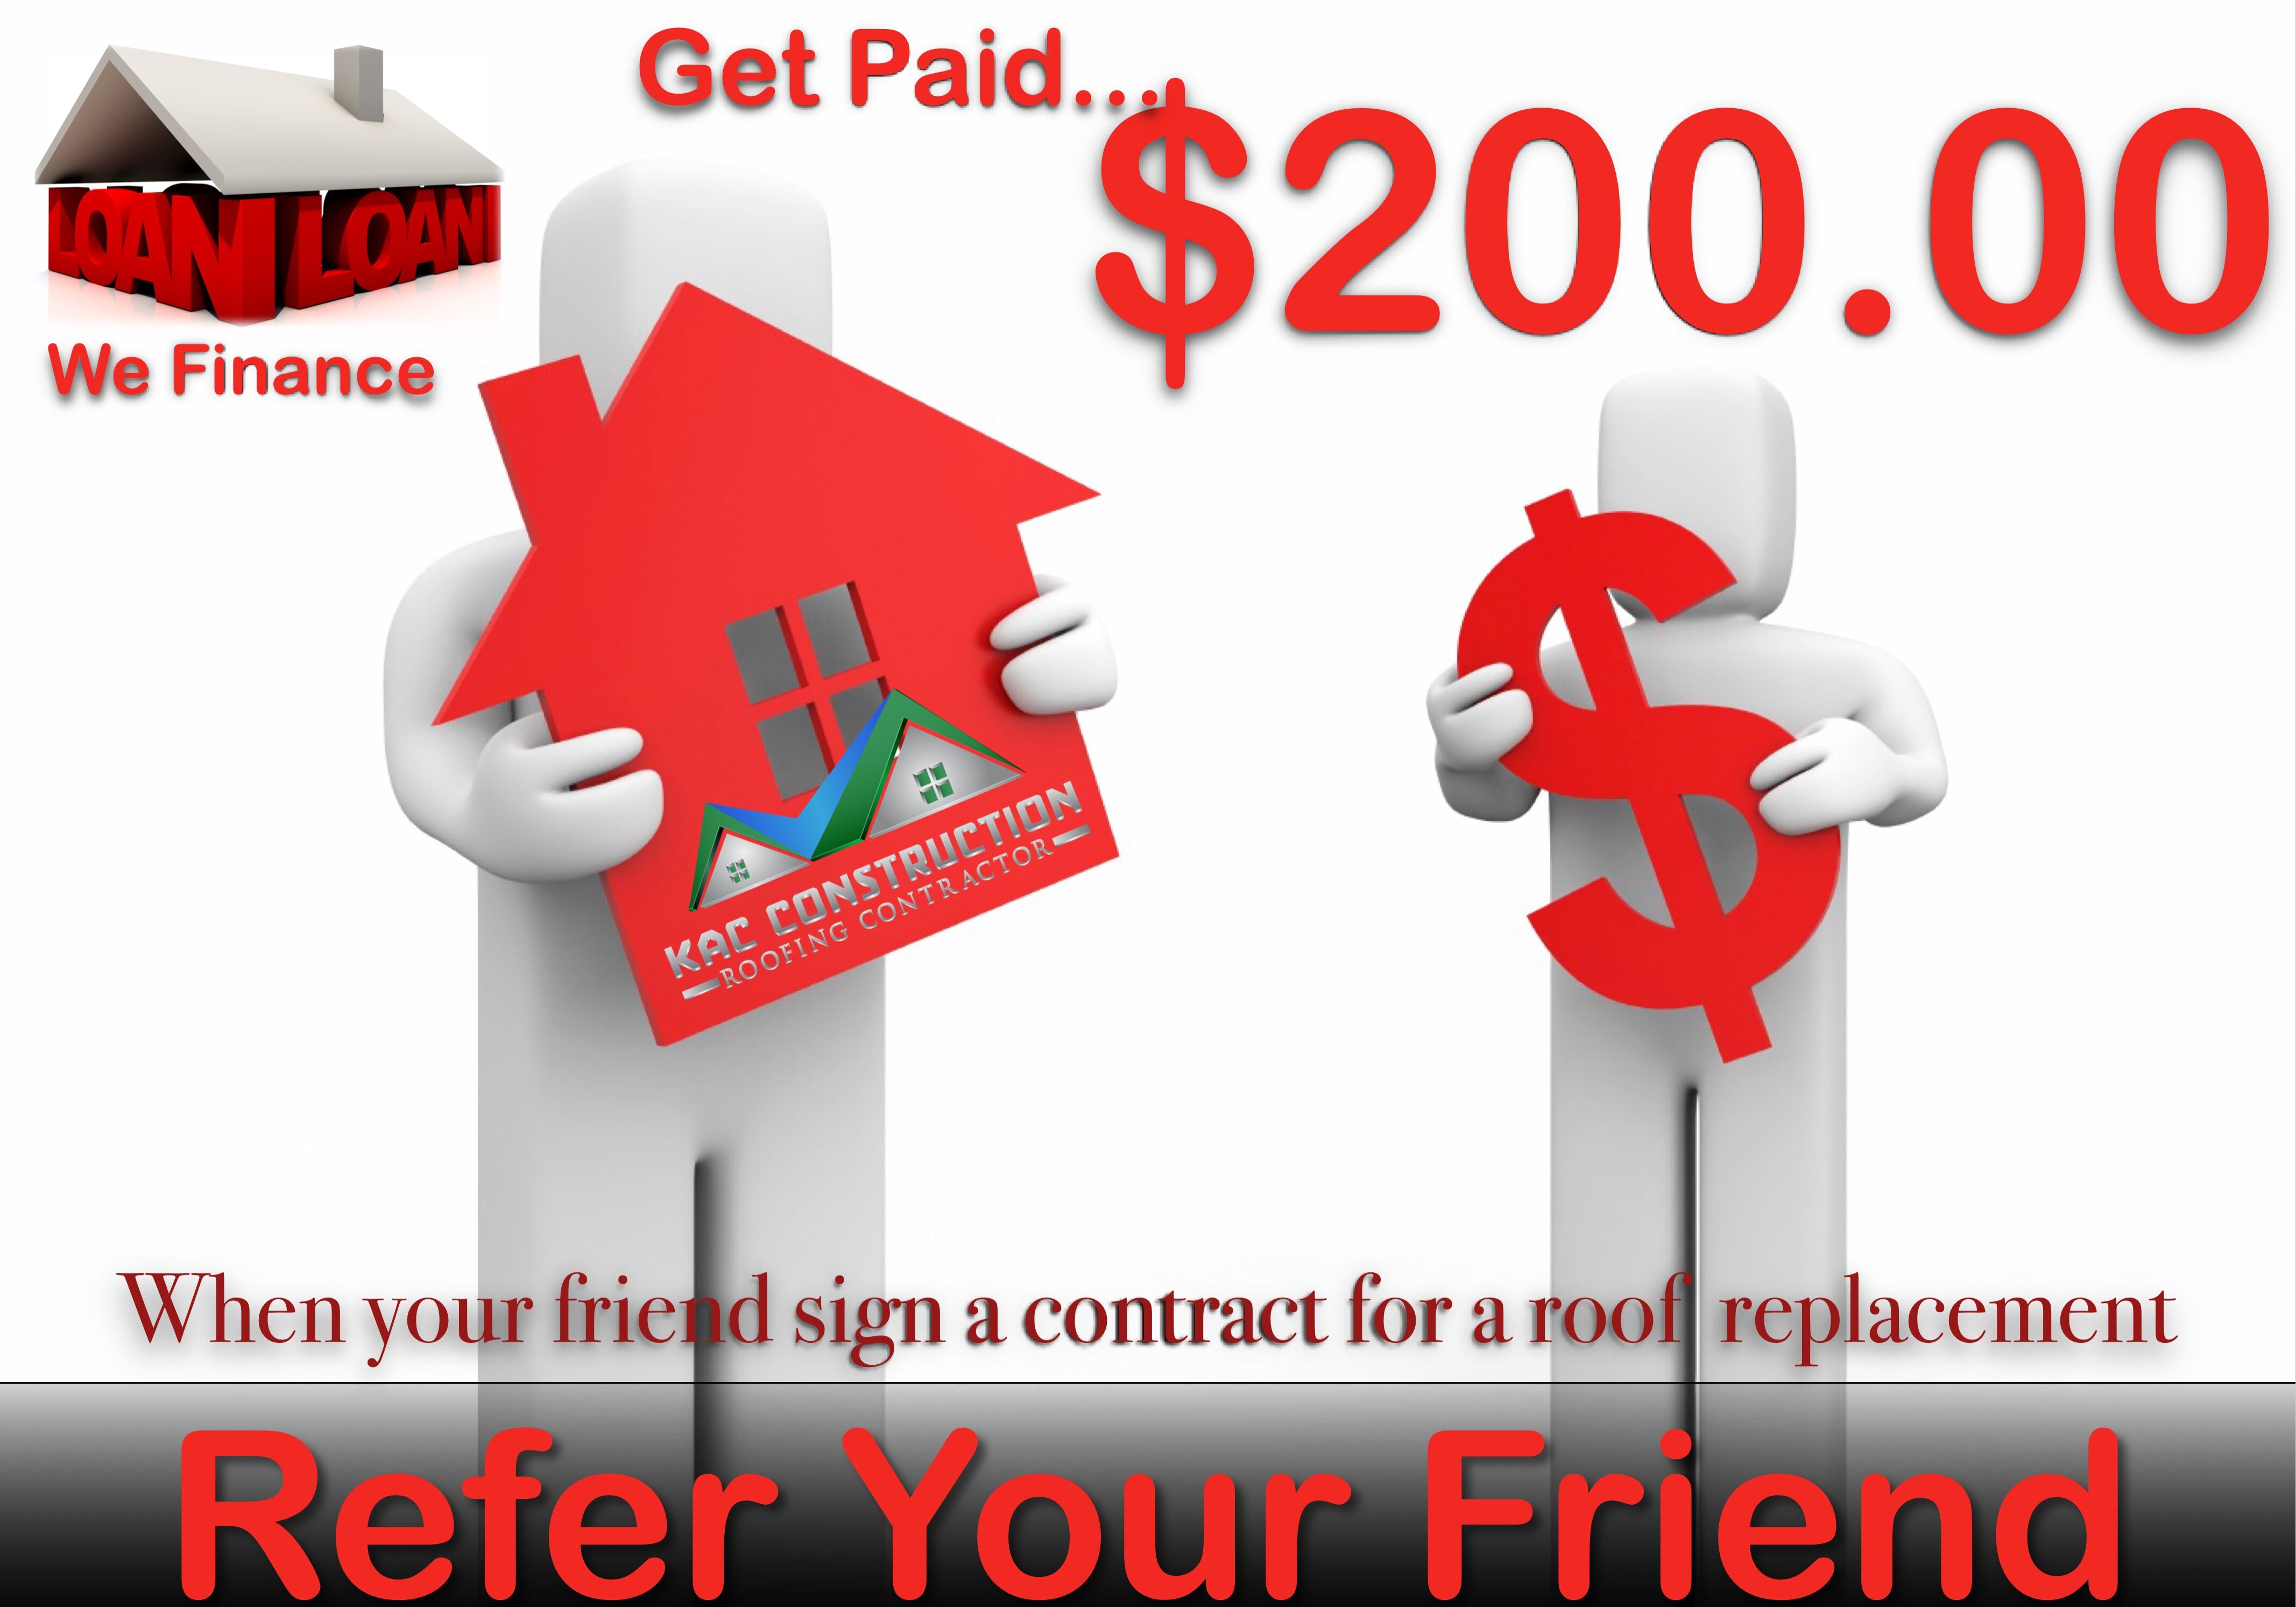 roof repair, roof financing, roof contractor, roof company, roofing company